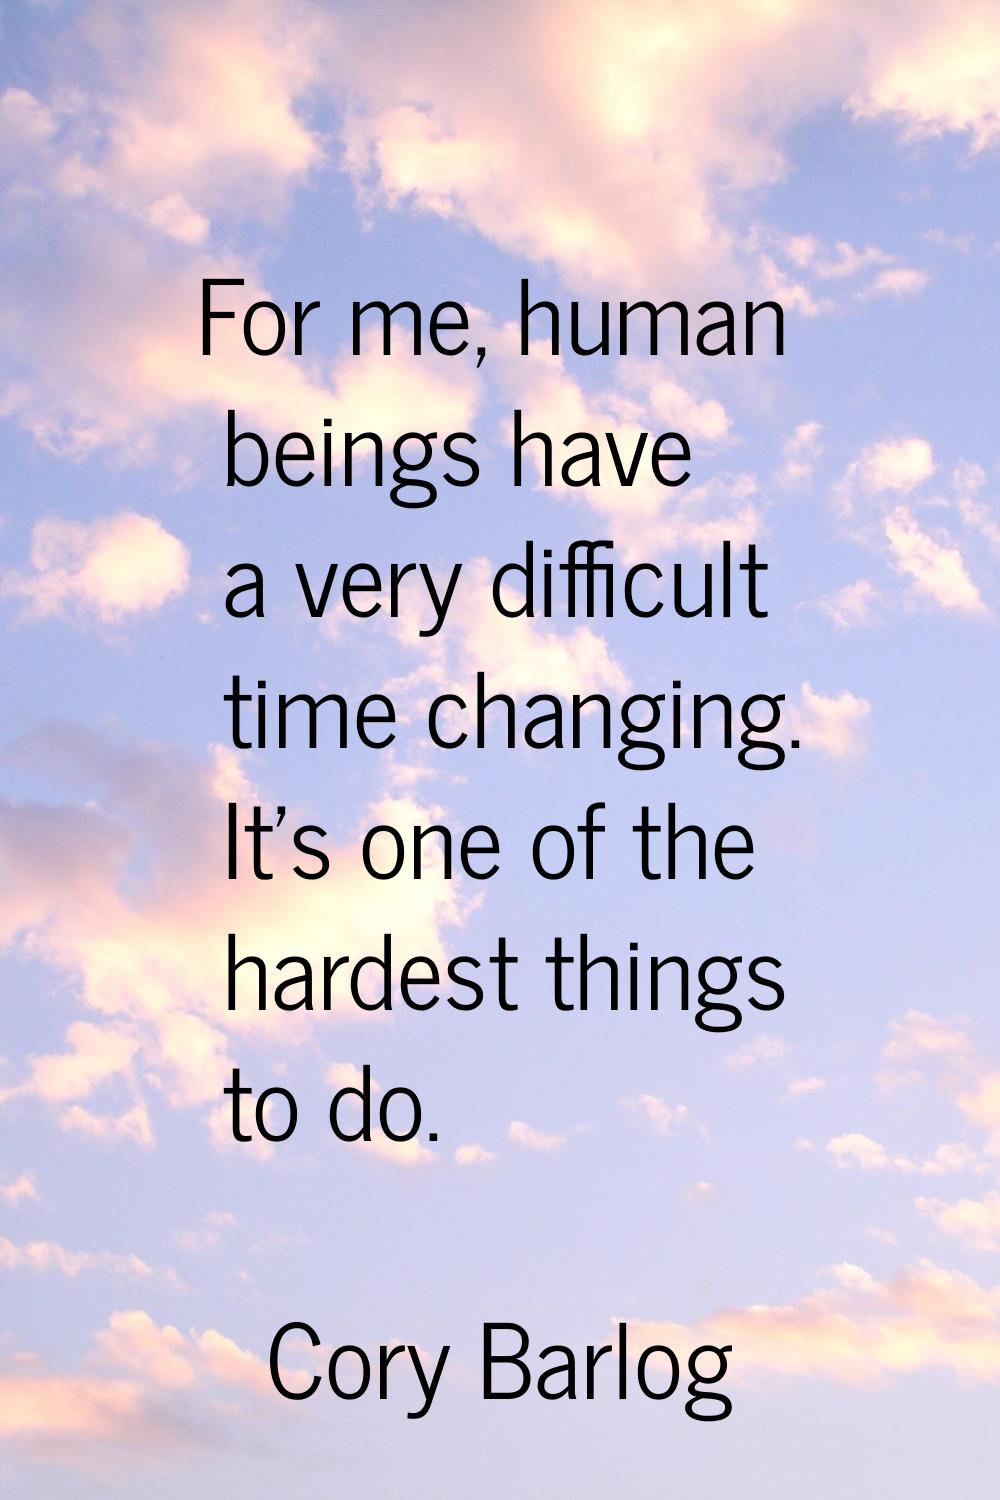 For me, human beings have a very difficult time changing. It's one of the hardest things to do.